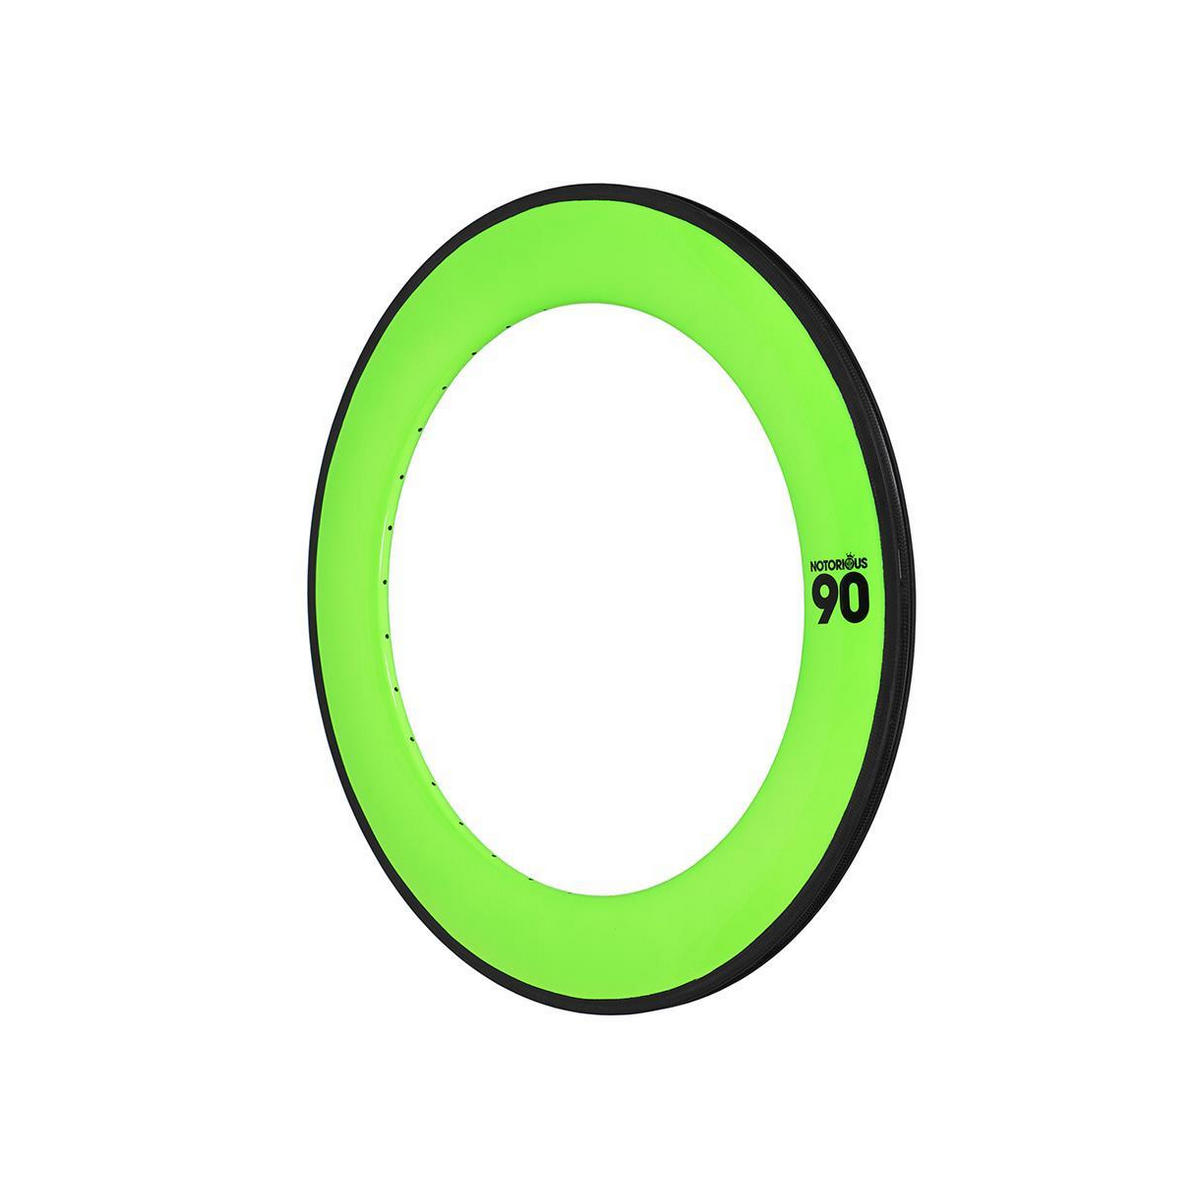 rim notorious 90 700c carbon 32h msw fluo green